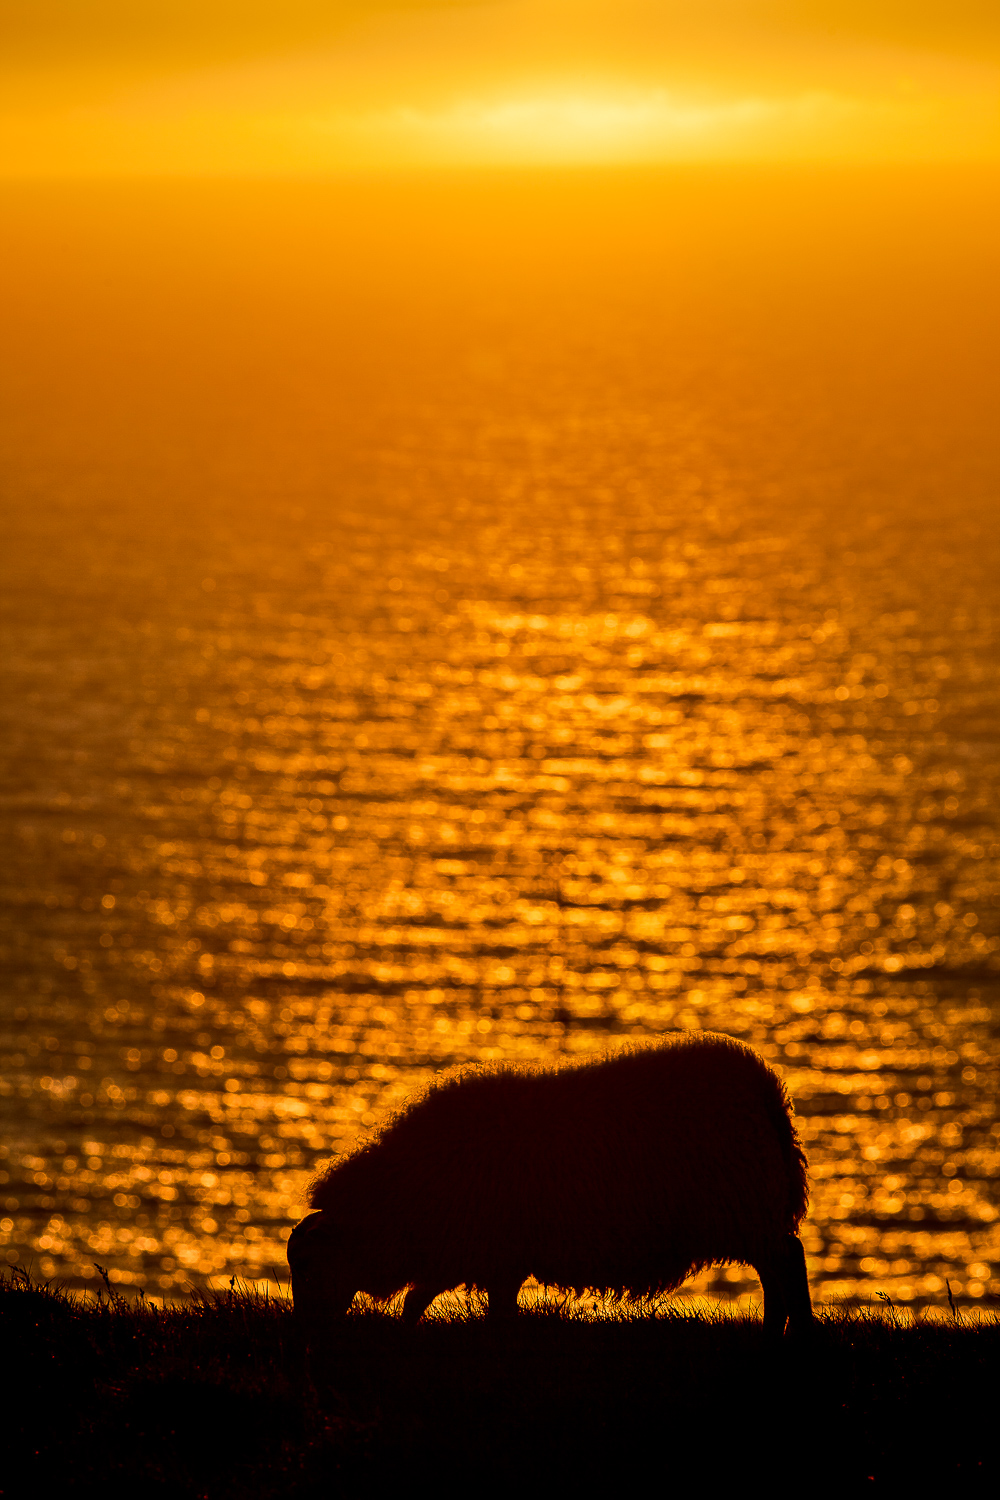 A sheep calmly grazes as a magnificent sunset sinks below the horizon on the Látrabjarg Cliffs in the western most part of Iceland .